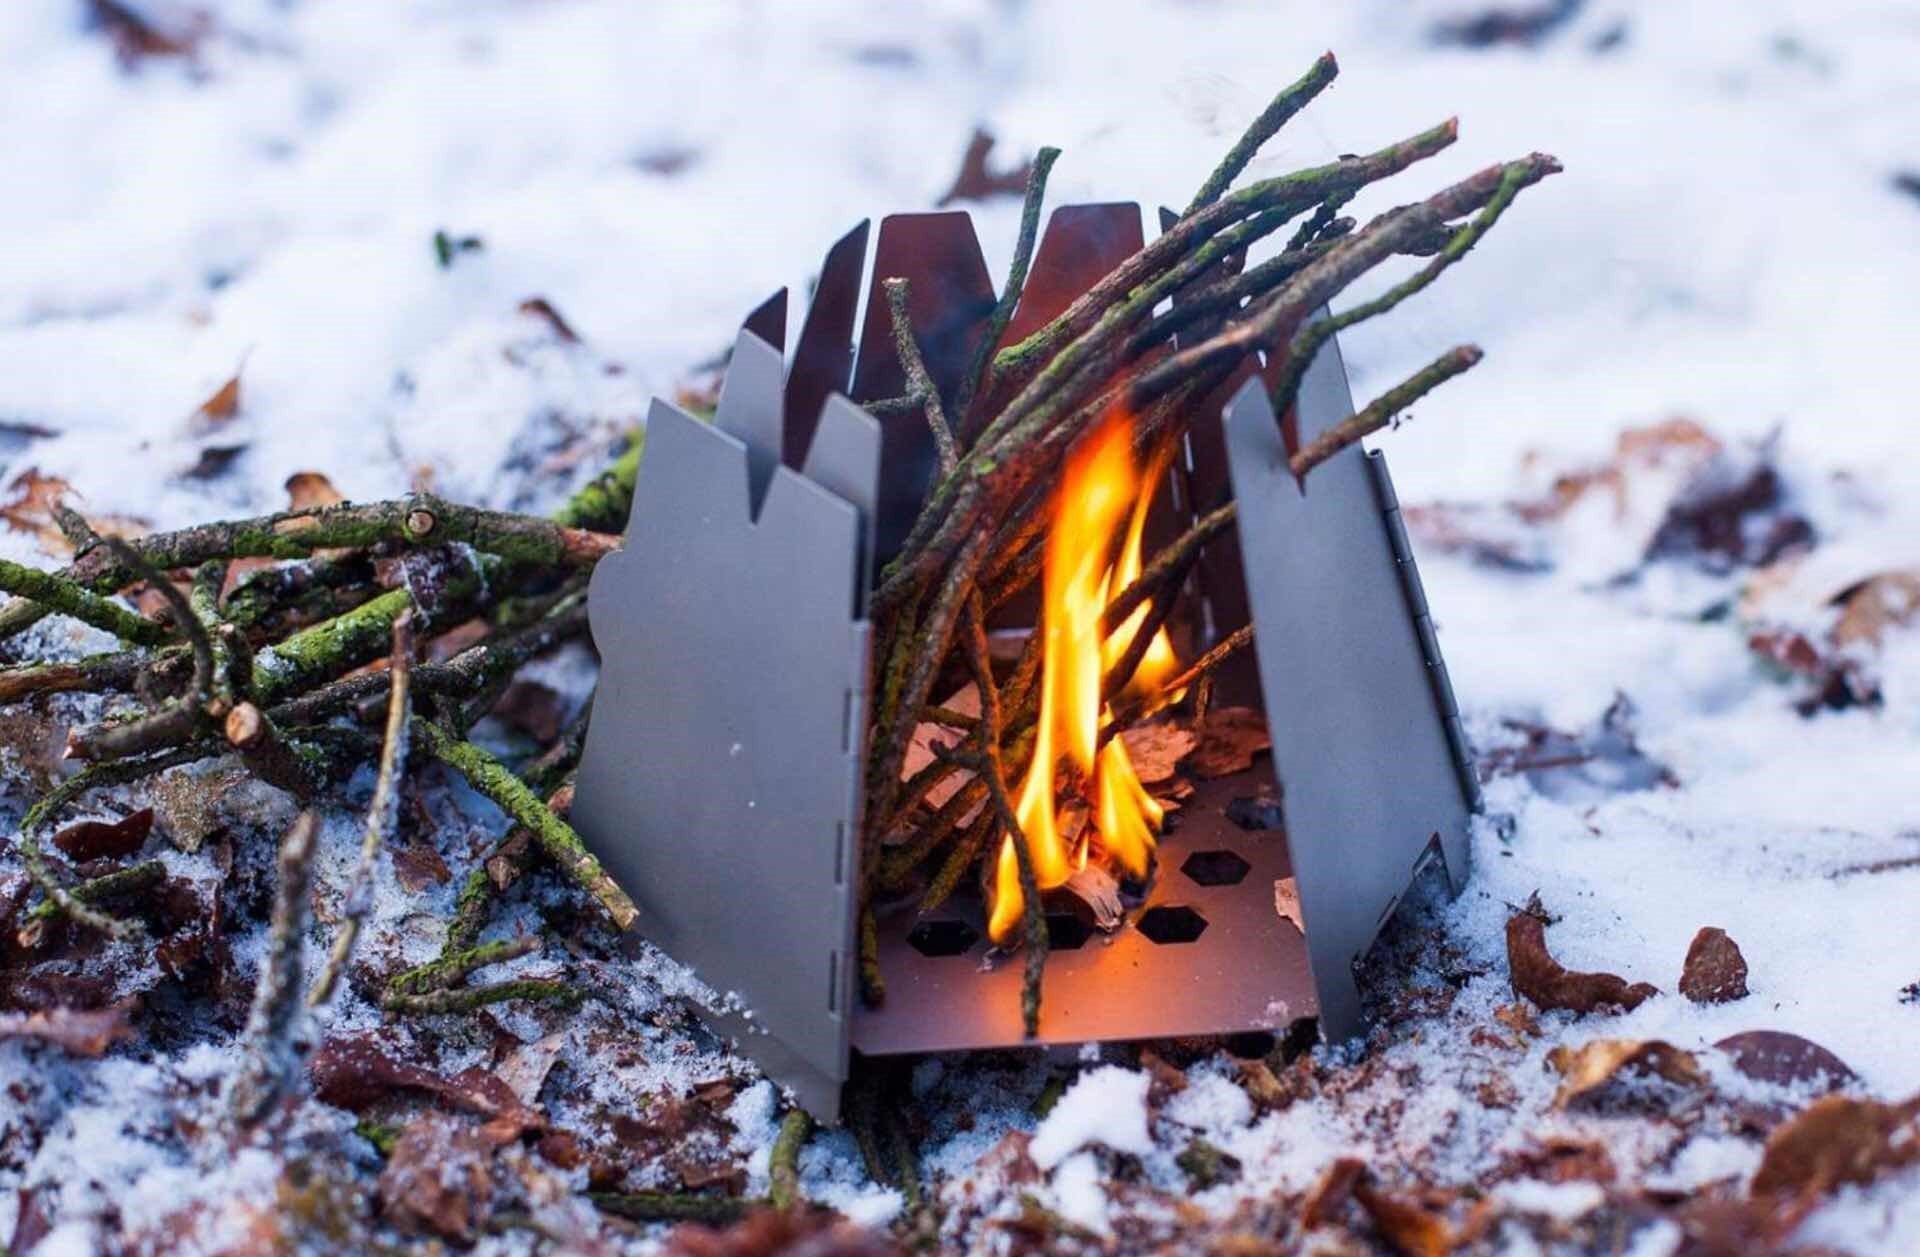 Choosing the Best Portable Outdoor Stove for Your Hiking Expedition Light Hiking Gear